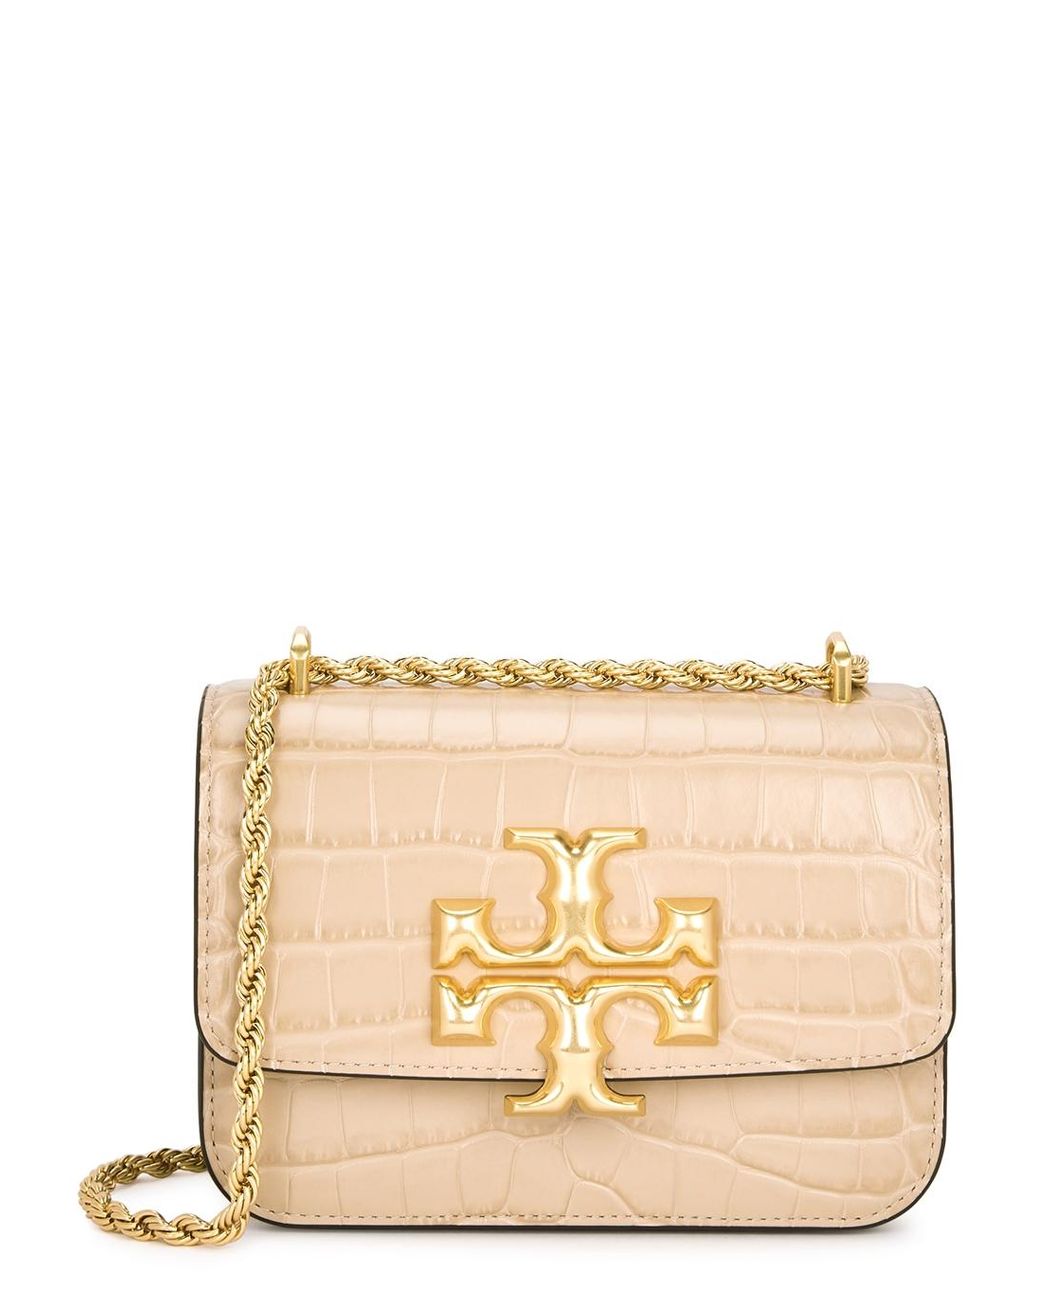 Tory Burch Eleanor Small Crocodile-effect Leather Shoulder Bag in Natural